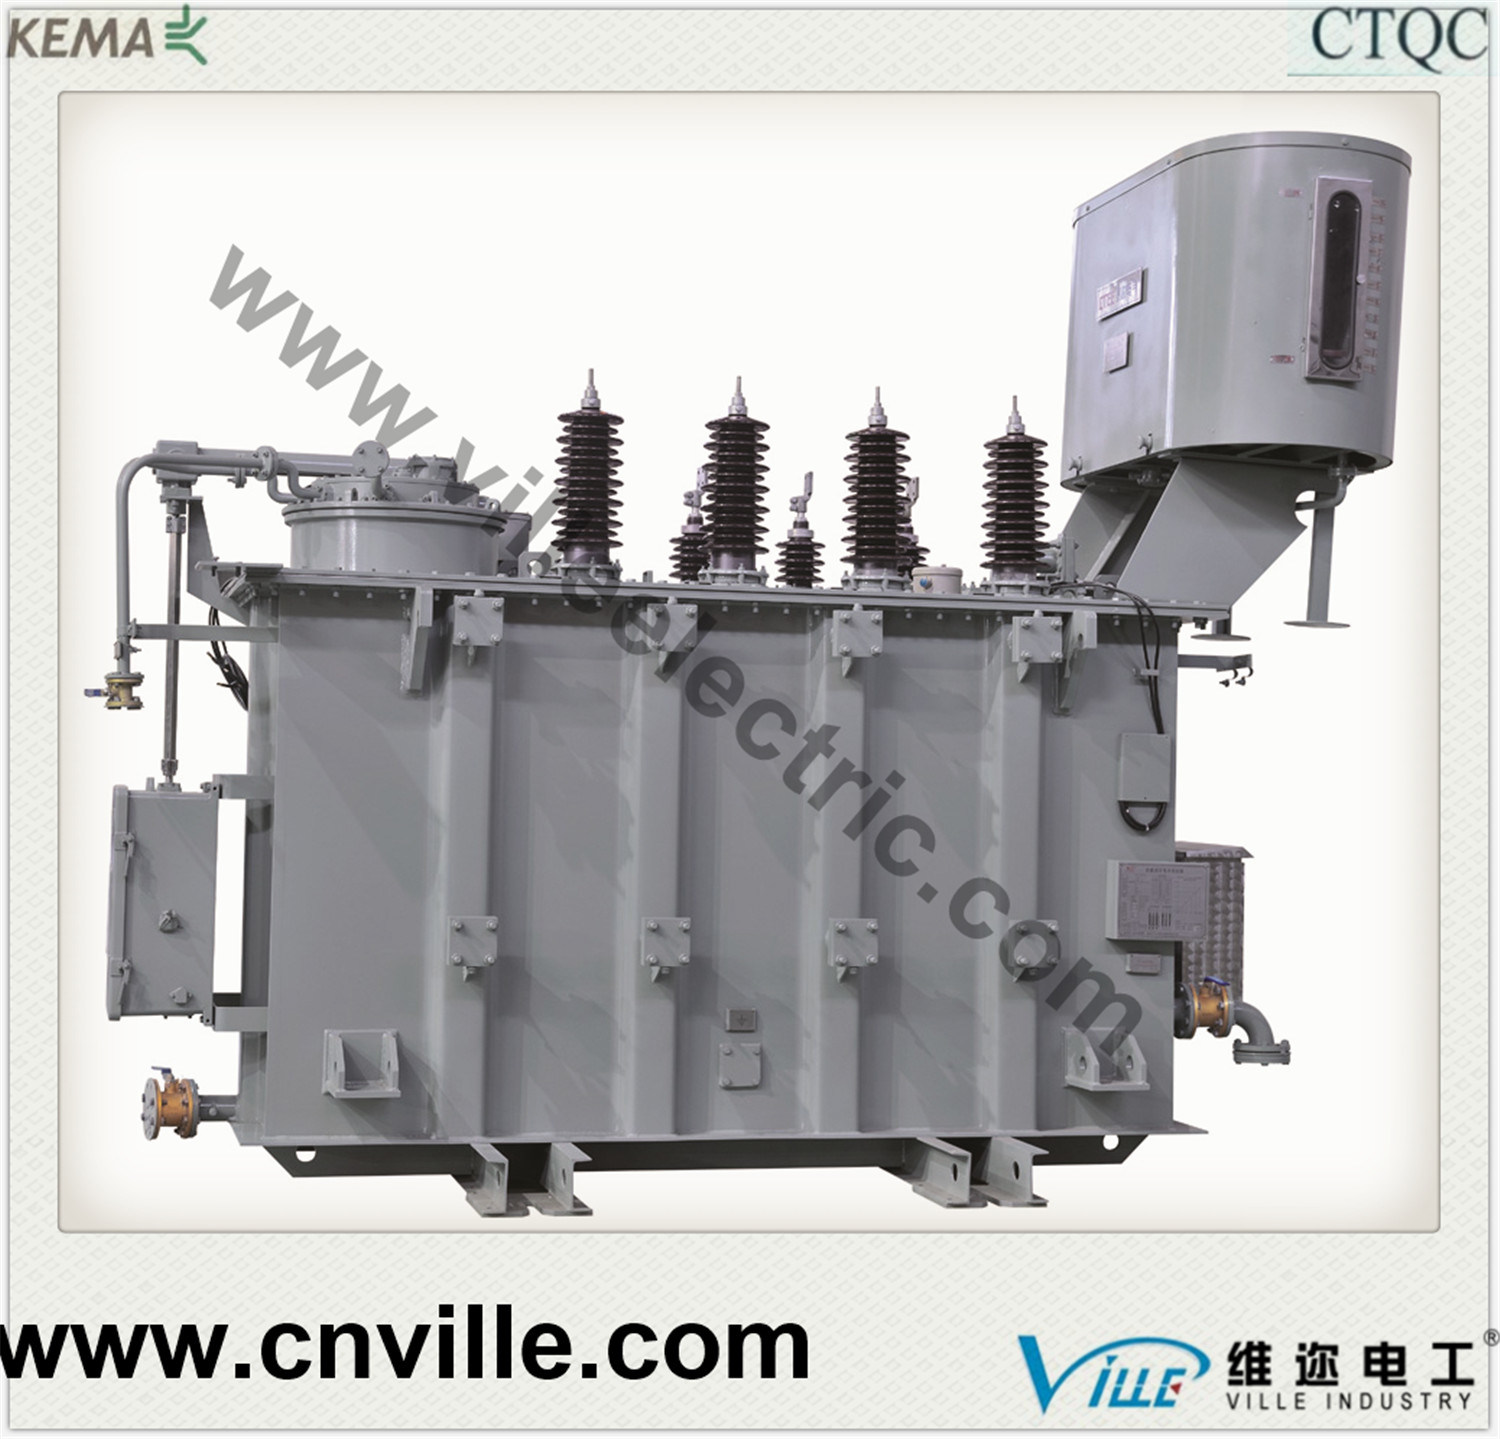 Sz-40000/69/6.3 40mva 66kv Double-Winding Power Transformers with on-Load Tap Changer